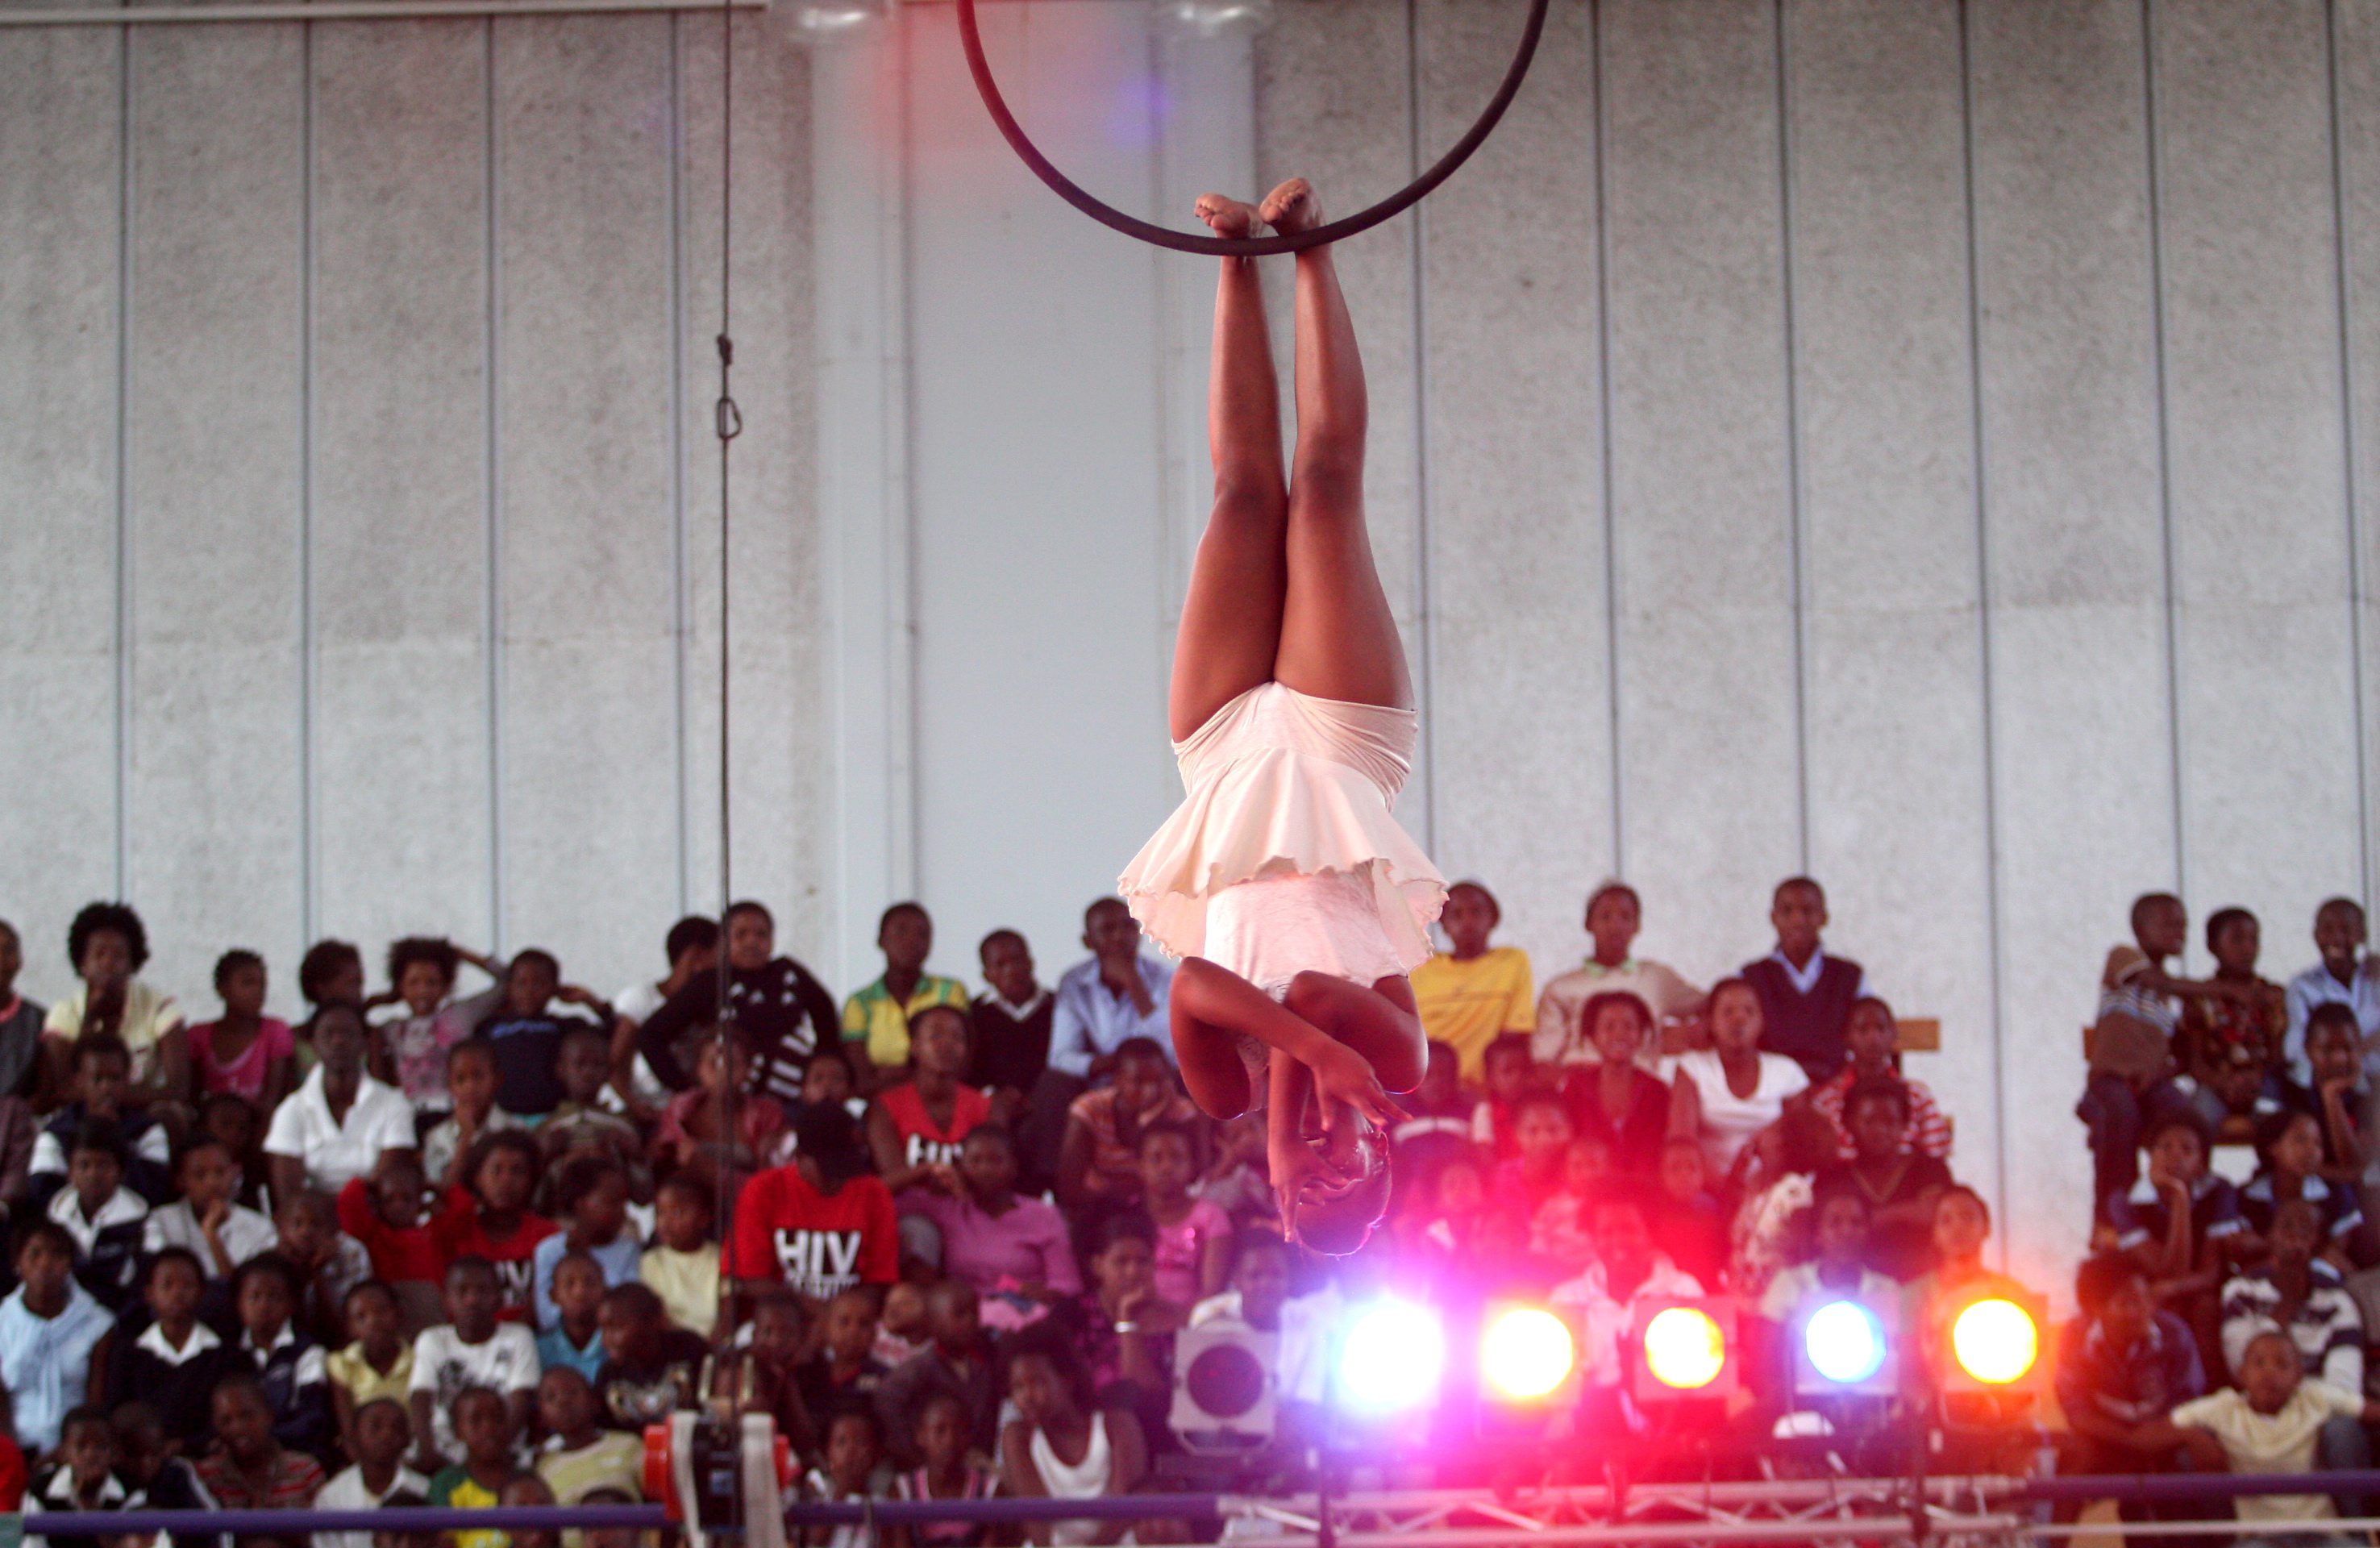 CAPE TOWN, SOUTH AFRICA  1 December 2009: The Zip Zap Circus School marks World Aids Day by celebrating 'Living Positively' through a special Zip Zap circus show starring HIV-positive children at the OR Tambo Hall on December 1, 2009, where 2000 children from Khayelitsha attended. (Photo by Gallo Images/Foto24/Taryn Carr)